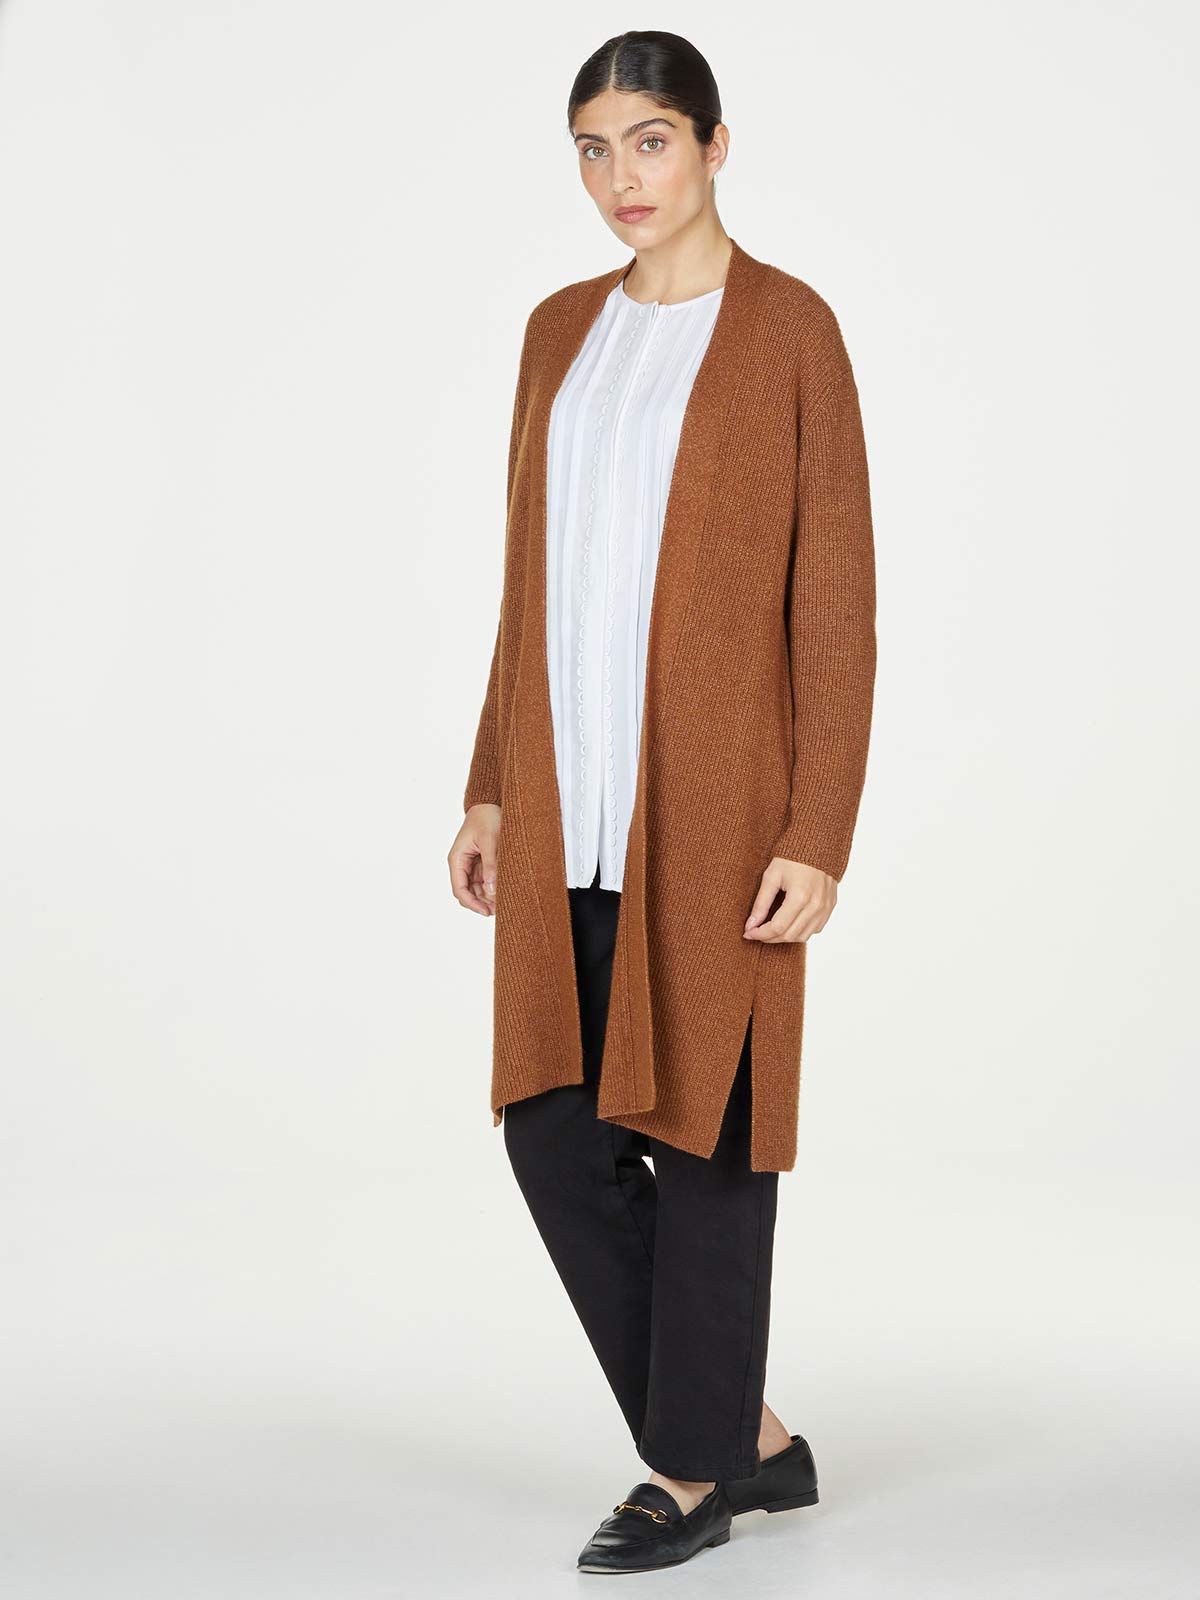 Thought Strickjacke Angie Toffee lang